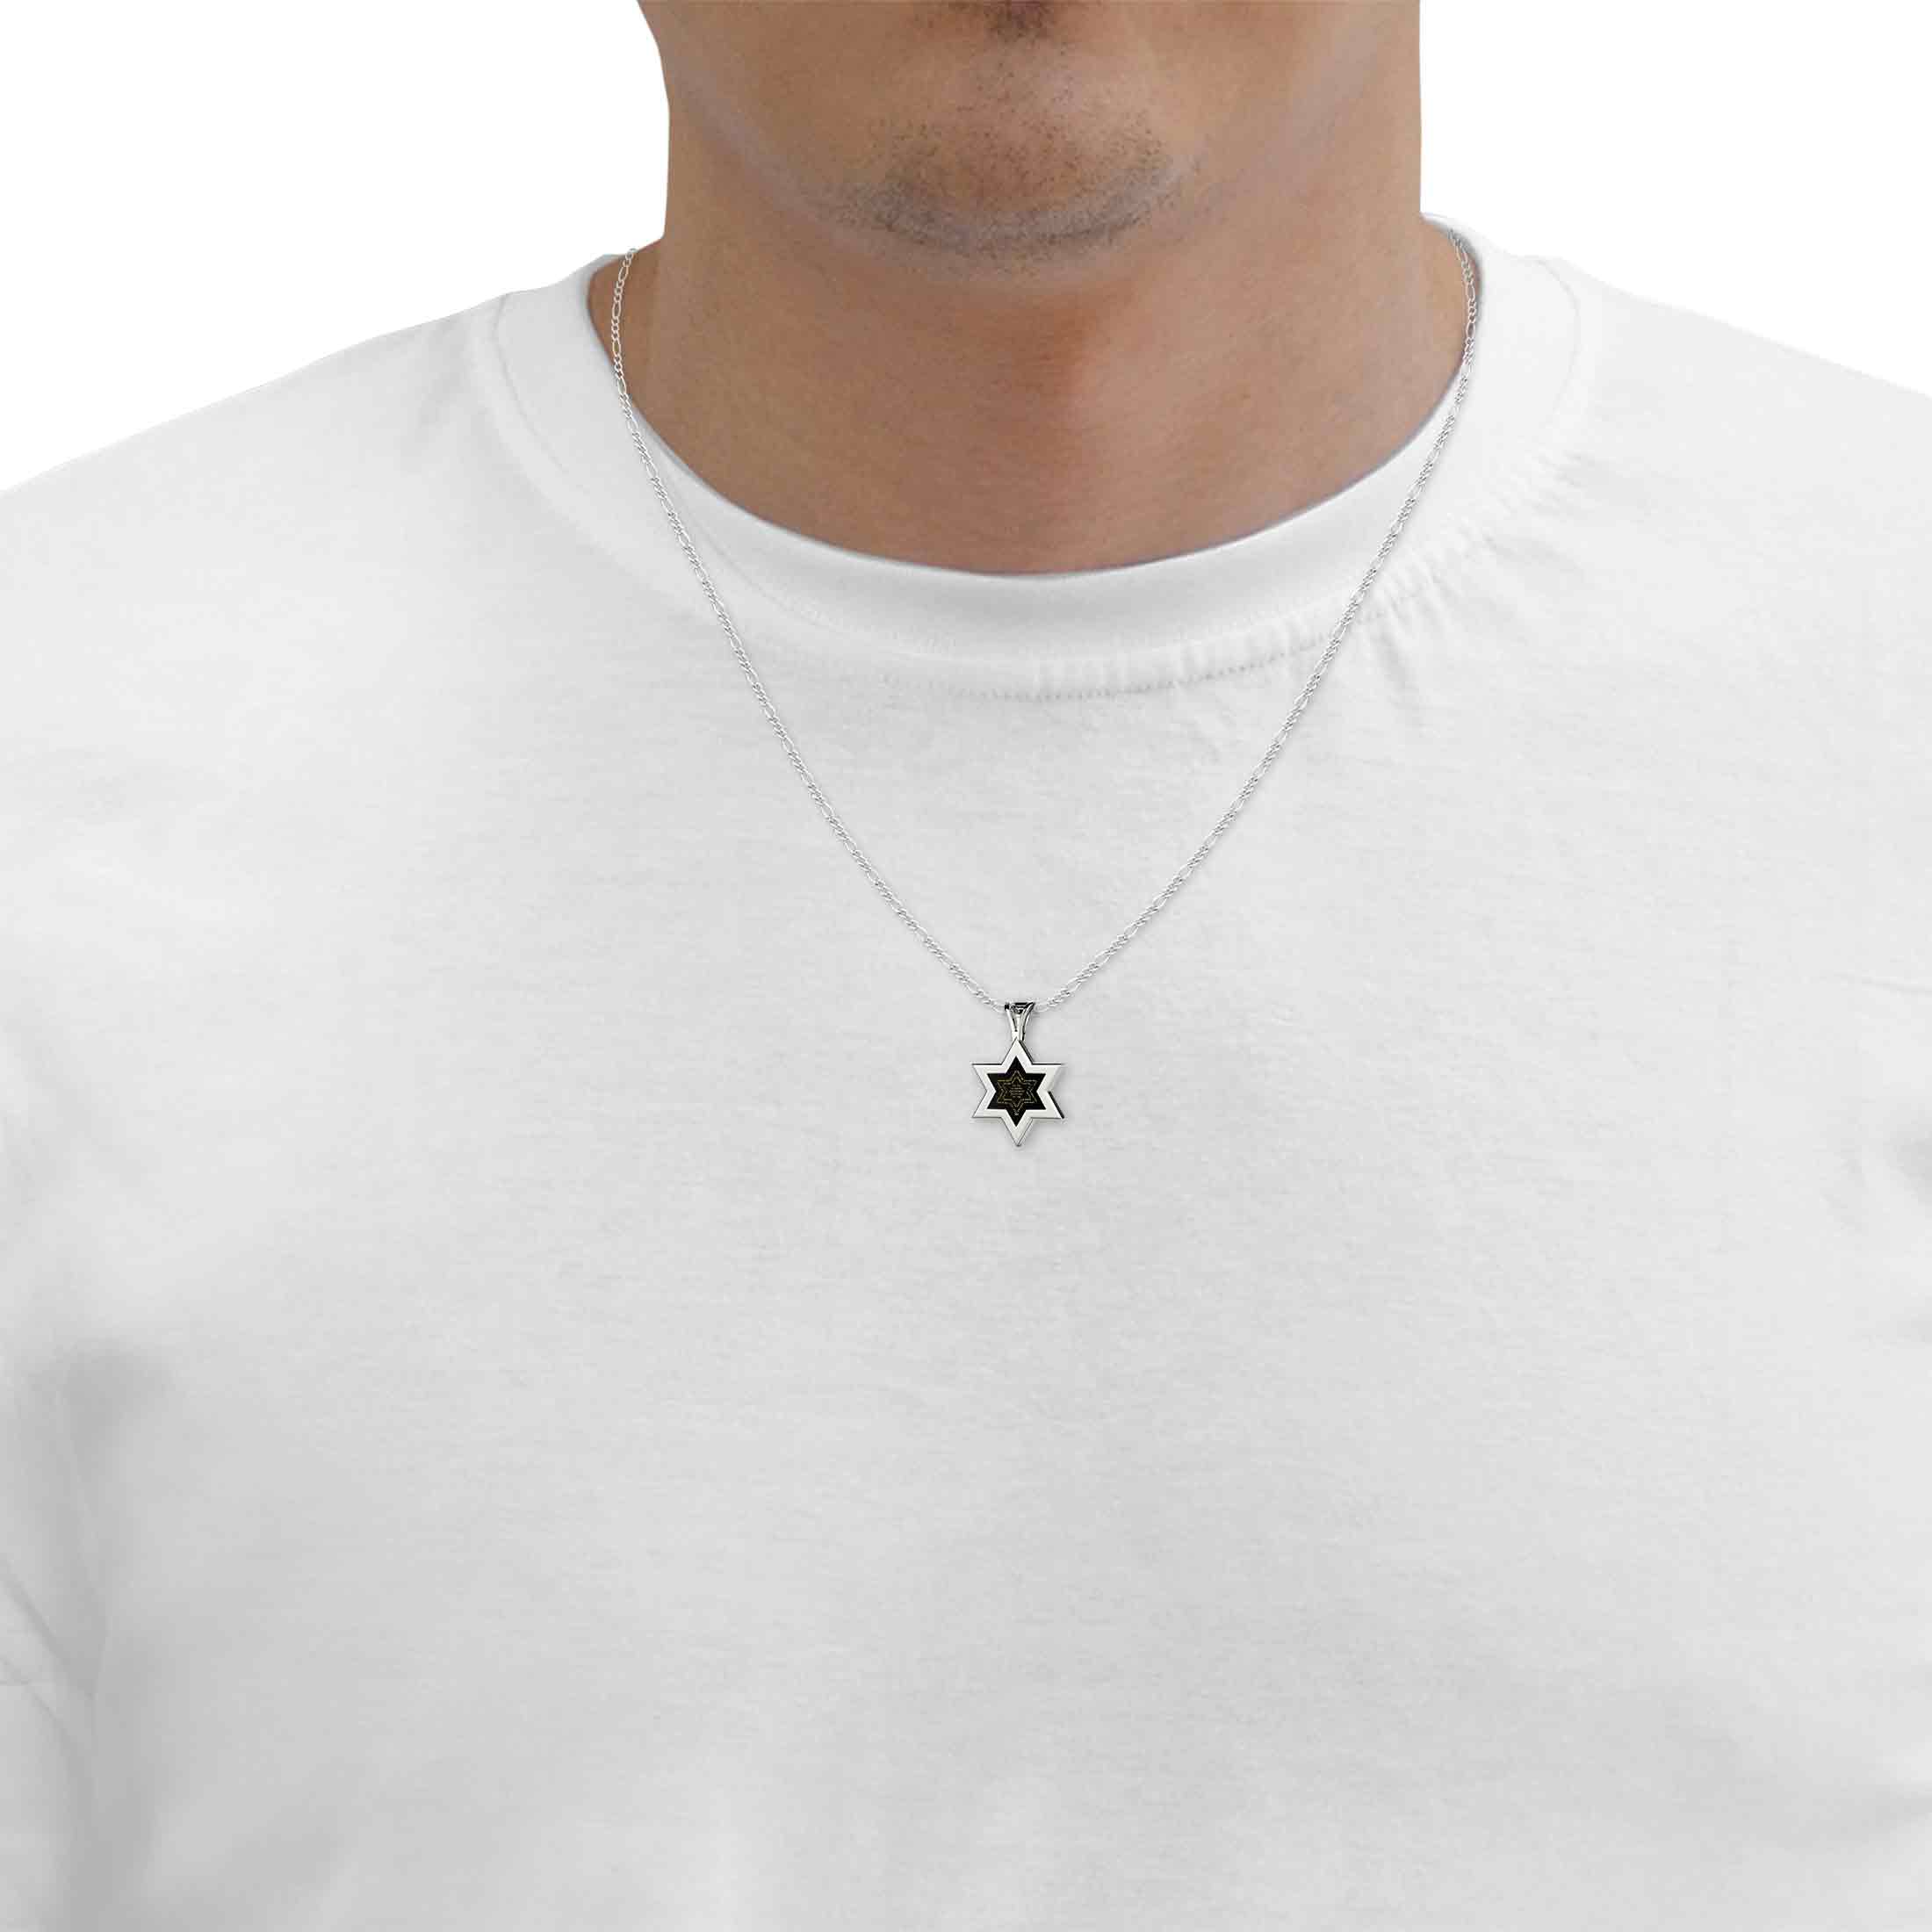 An artistic rendering of a Men's Star of David Necklace Ana Bekoach Kabbalah Pendant with the Ana Bekoach prayer inscribed within its center, enclosed by overlapping white stars on a black background.